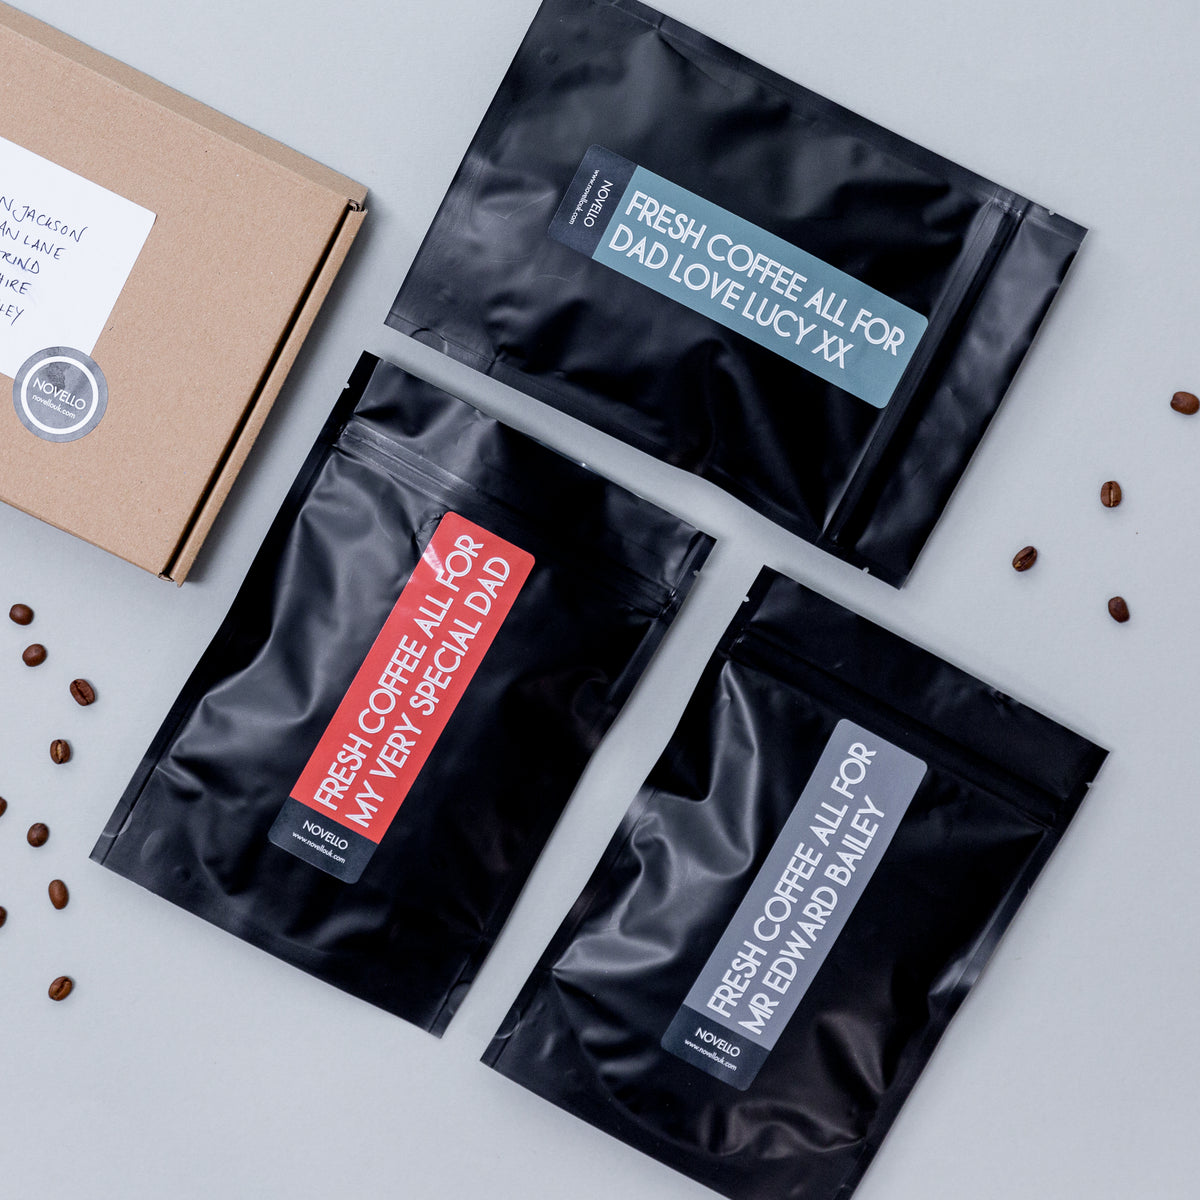 Fathers Personalised Monthly Coffee Subscription Gift